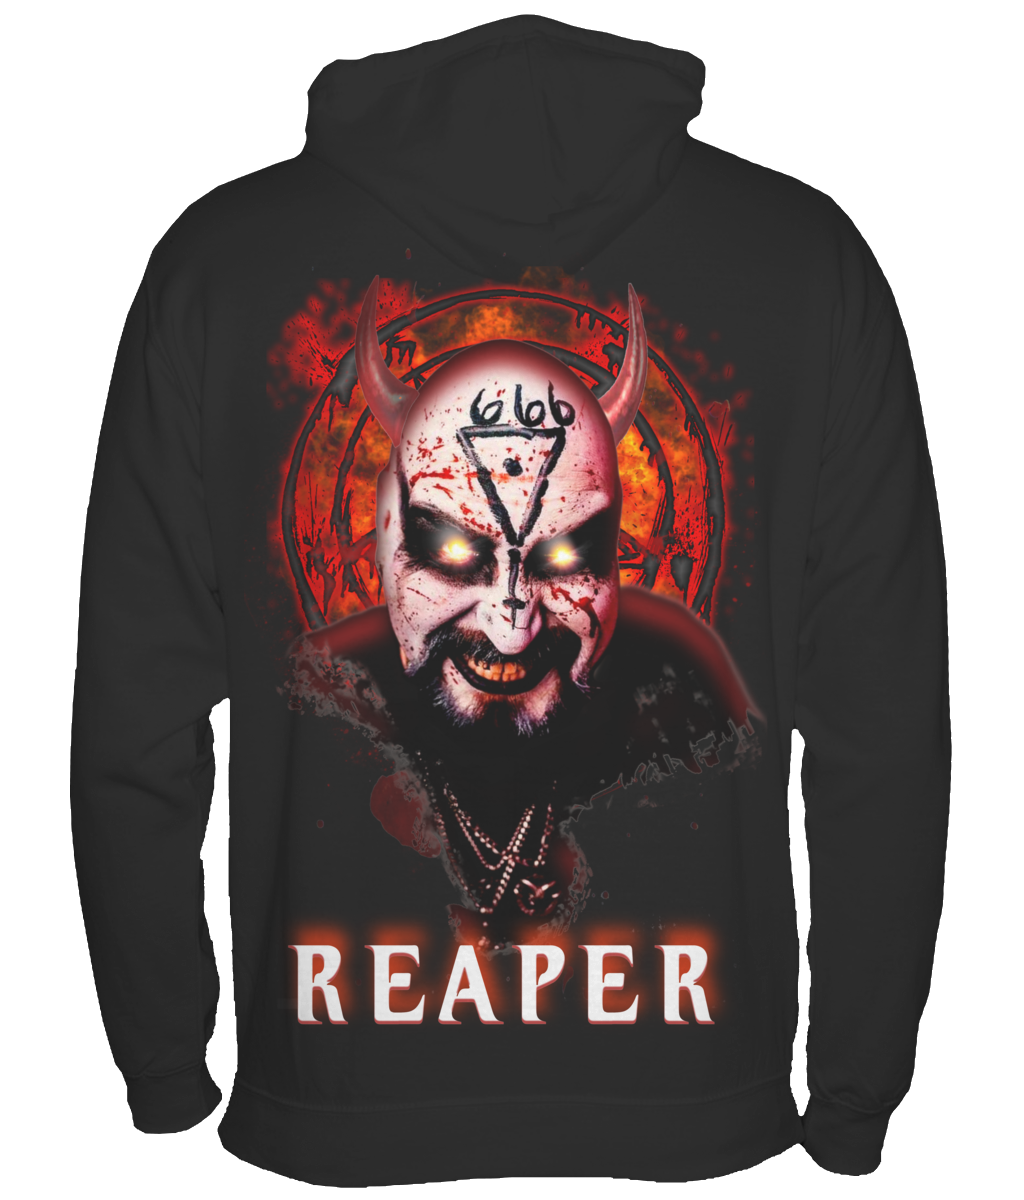 POISON VALLEY CLOTHING "REAPER" unisex hoodie  This simple and stylish classic hoodie will get the heads turning.  The front features a pentagram in flames.  With a HUGE back print featuring REAPER.  Made from cotton faced fabric ideal, it is an essential for any hoodie lover.  Fabric  80% ring spun cotton/20% polyester.